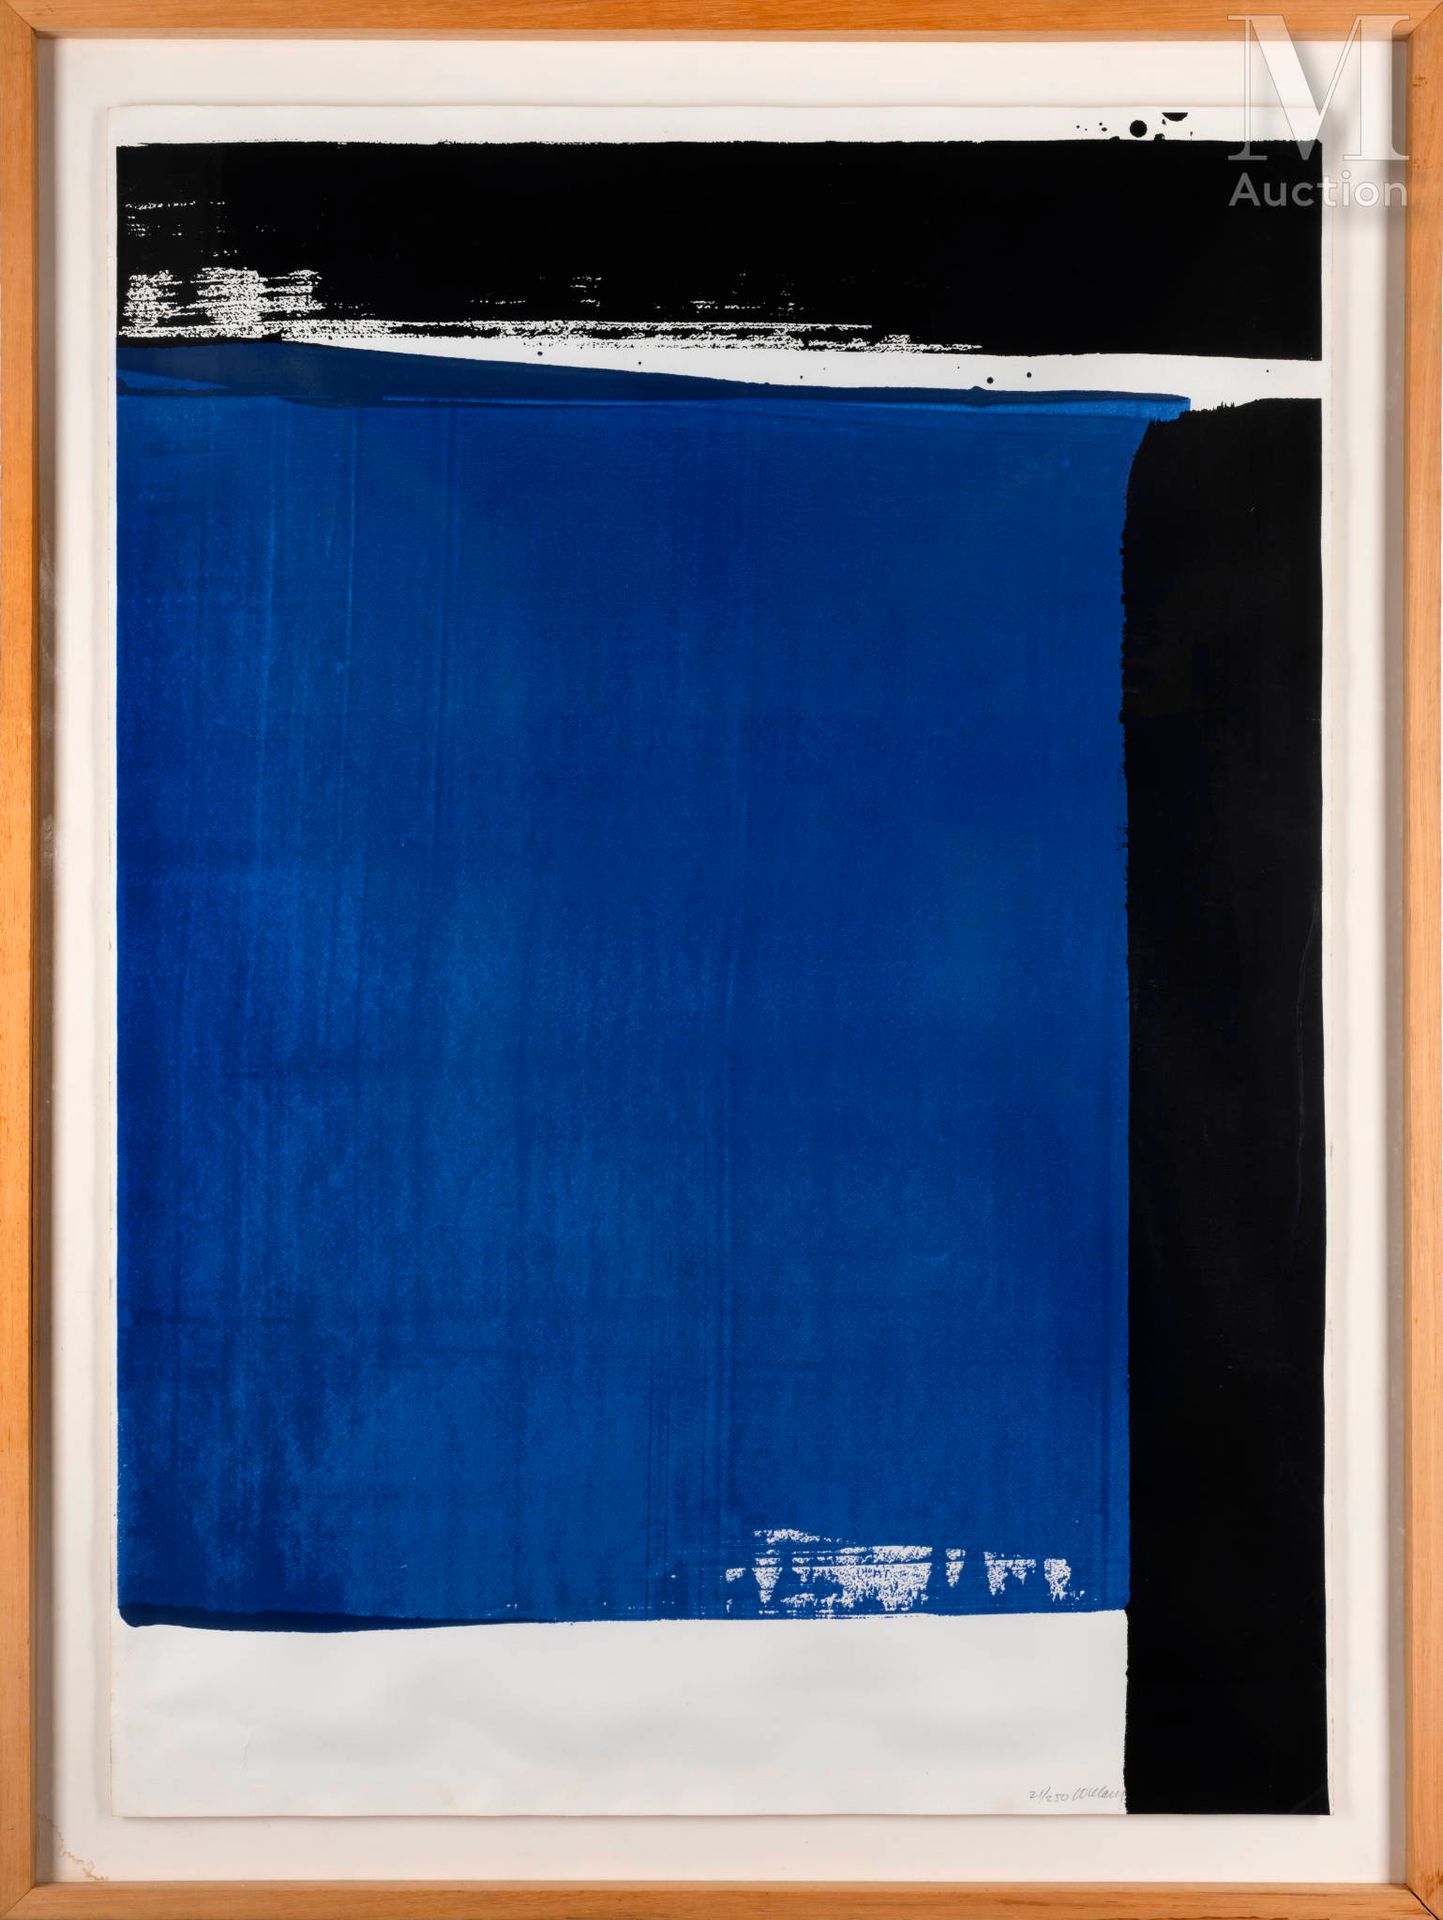 Pierre SOULAGES (1919 - 2022) Serigraphy n°16, 1981

Serigraphy on vellum, signe&hellip;